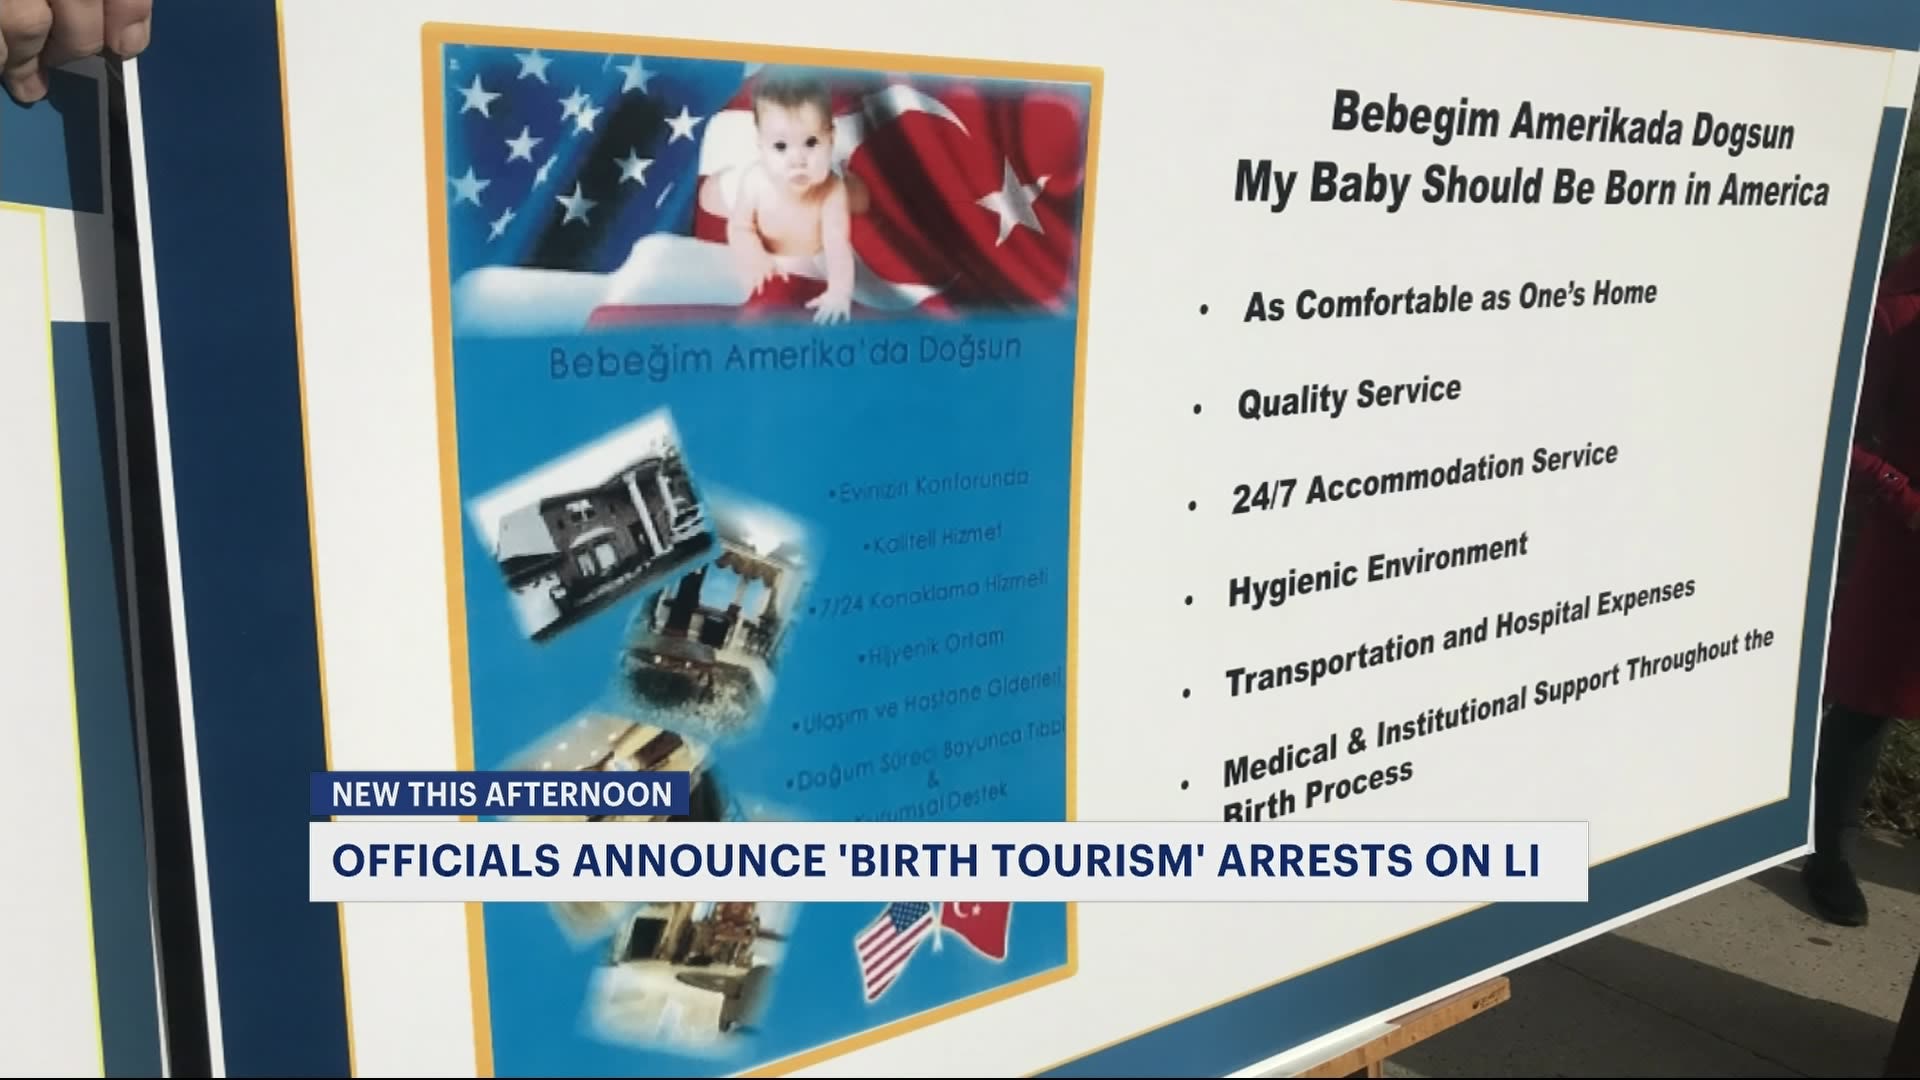 Feds: 6 charged in ‘birth tourism’ scheme on Long Island